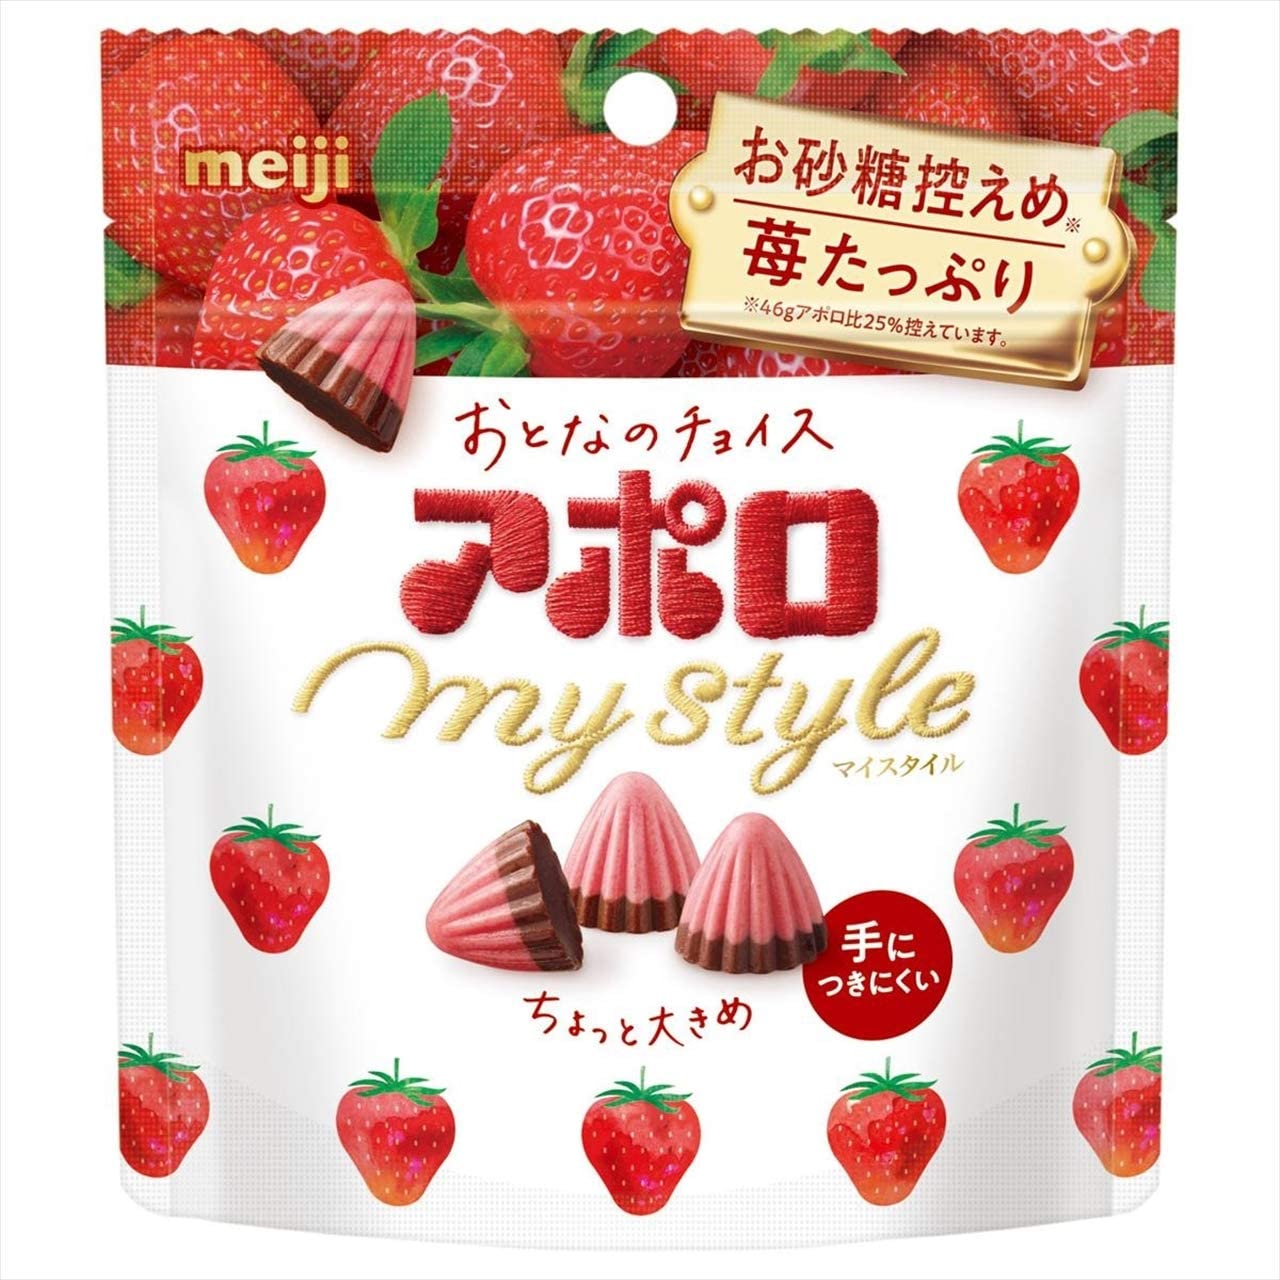 Japanese Popular Meiji sweets Apollo Adult Female My Style 41g x 8 bags JP 6427  画像2